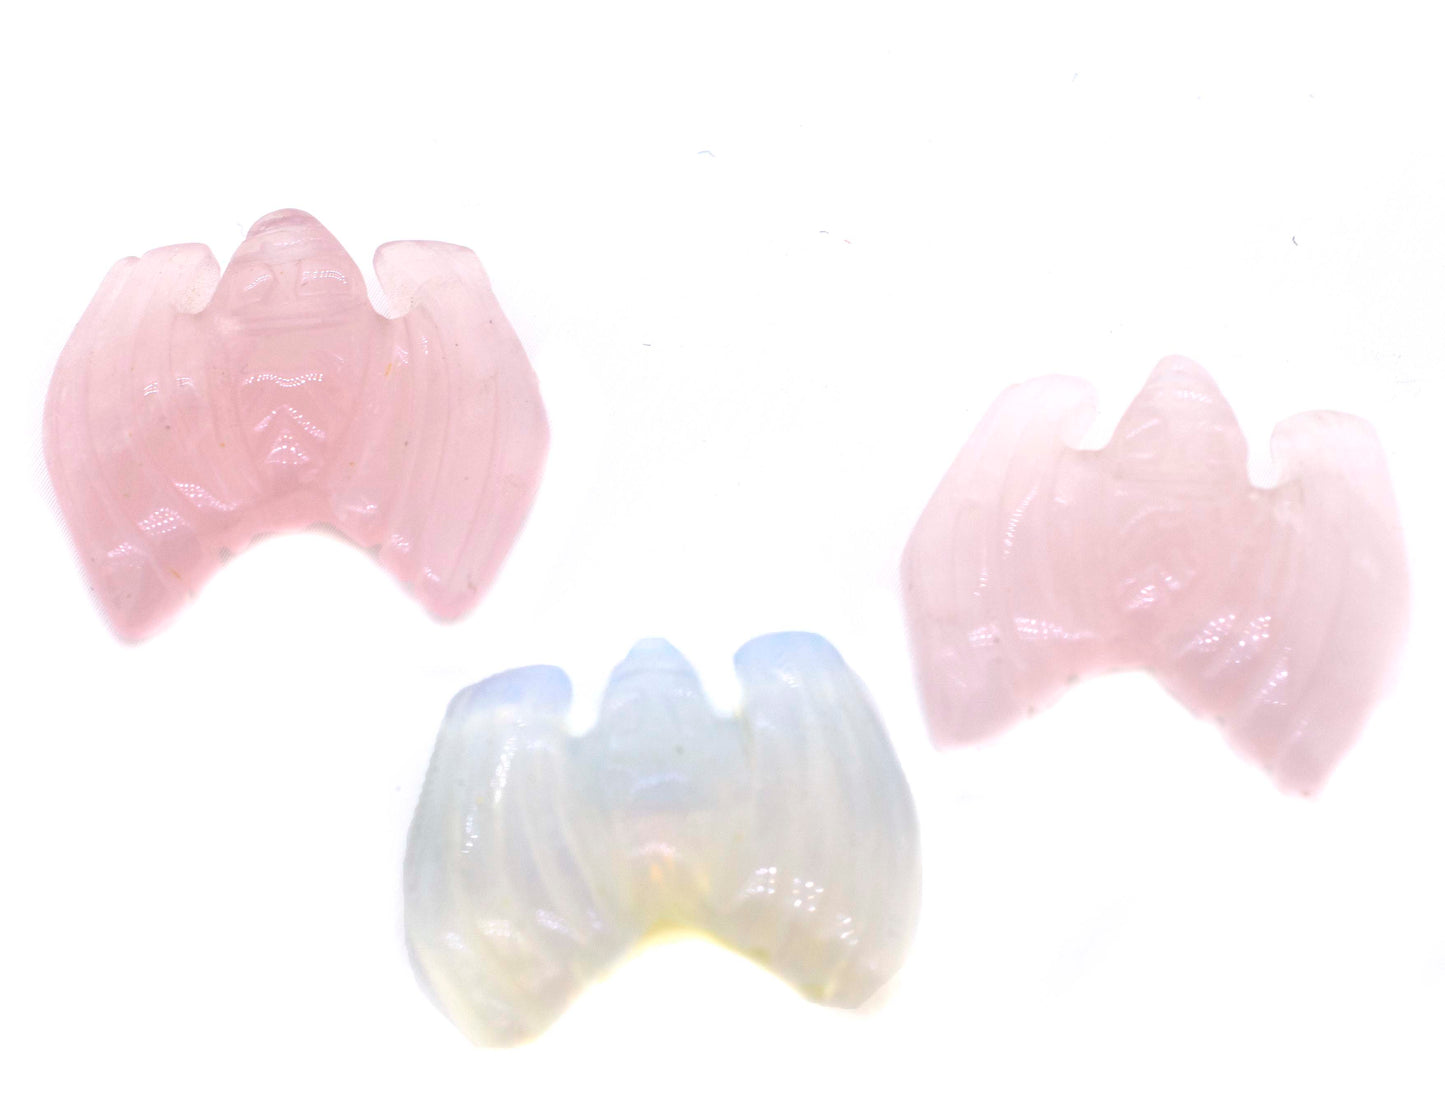 A set of three pink or white Bat Gemstone Figures perfect for decor.